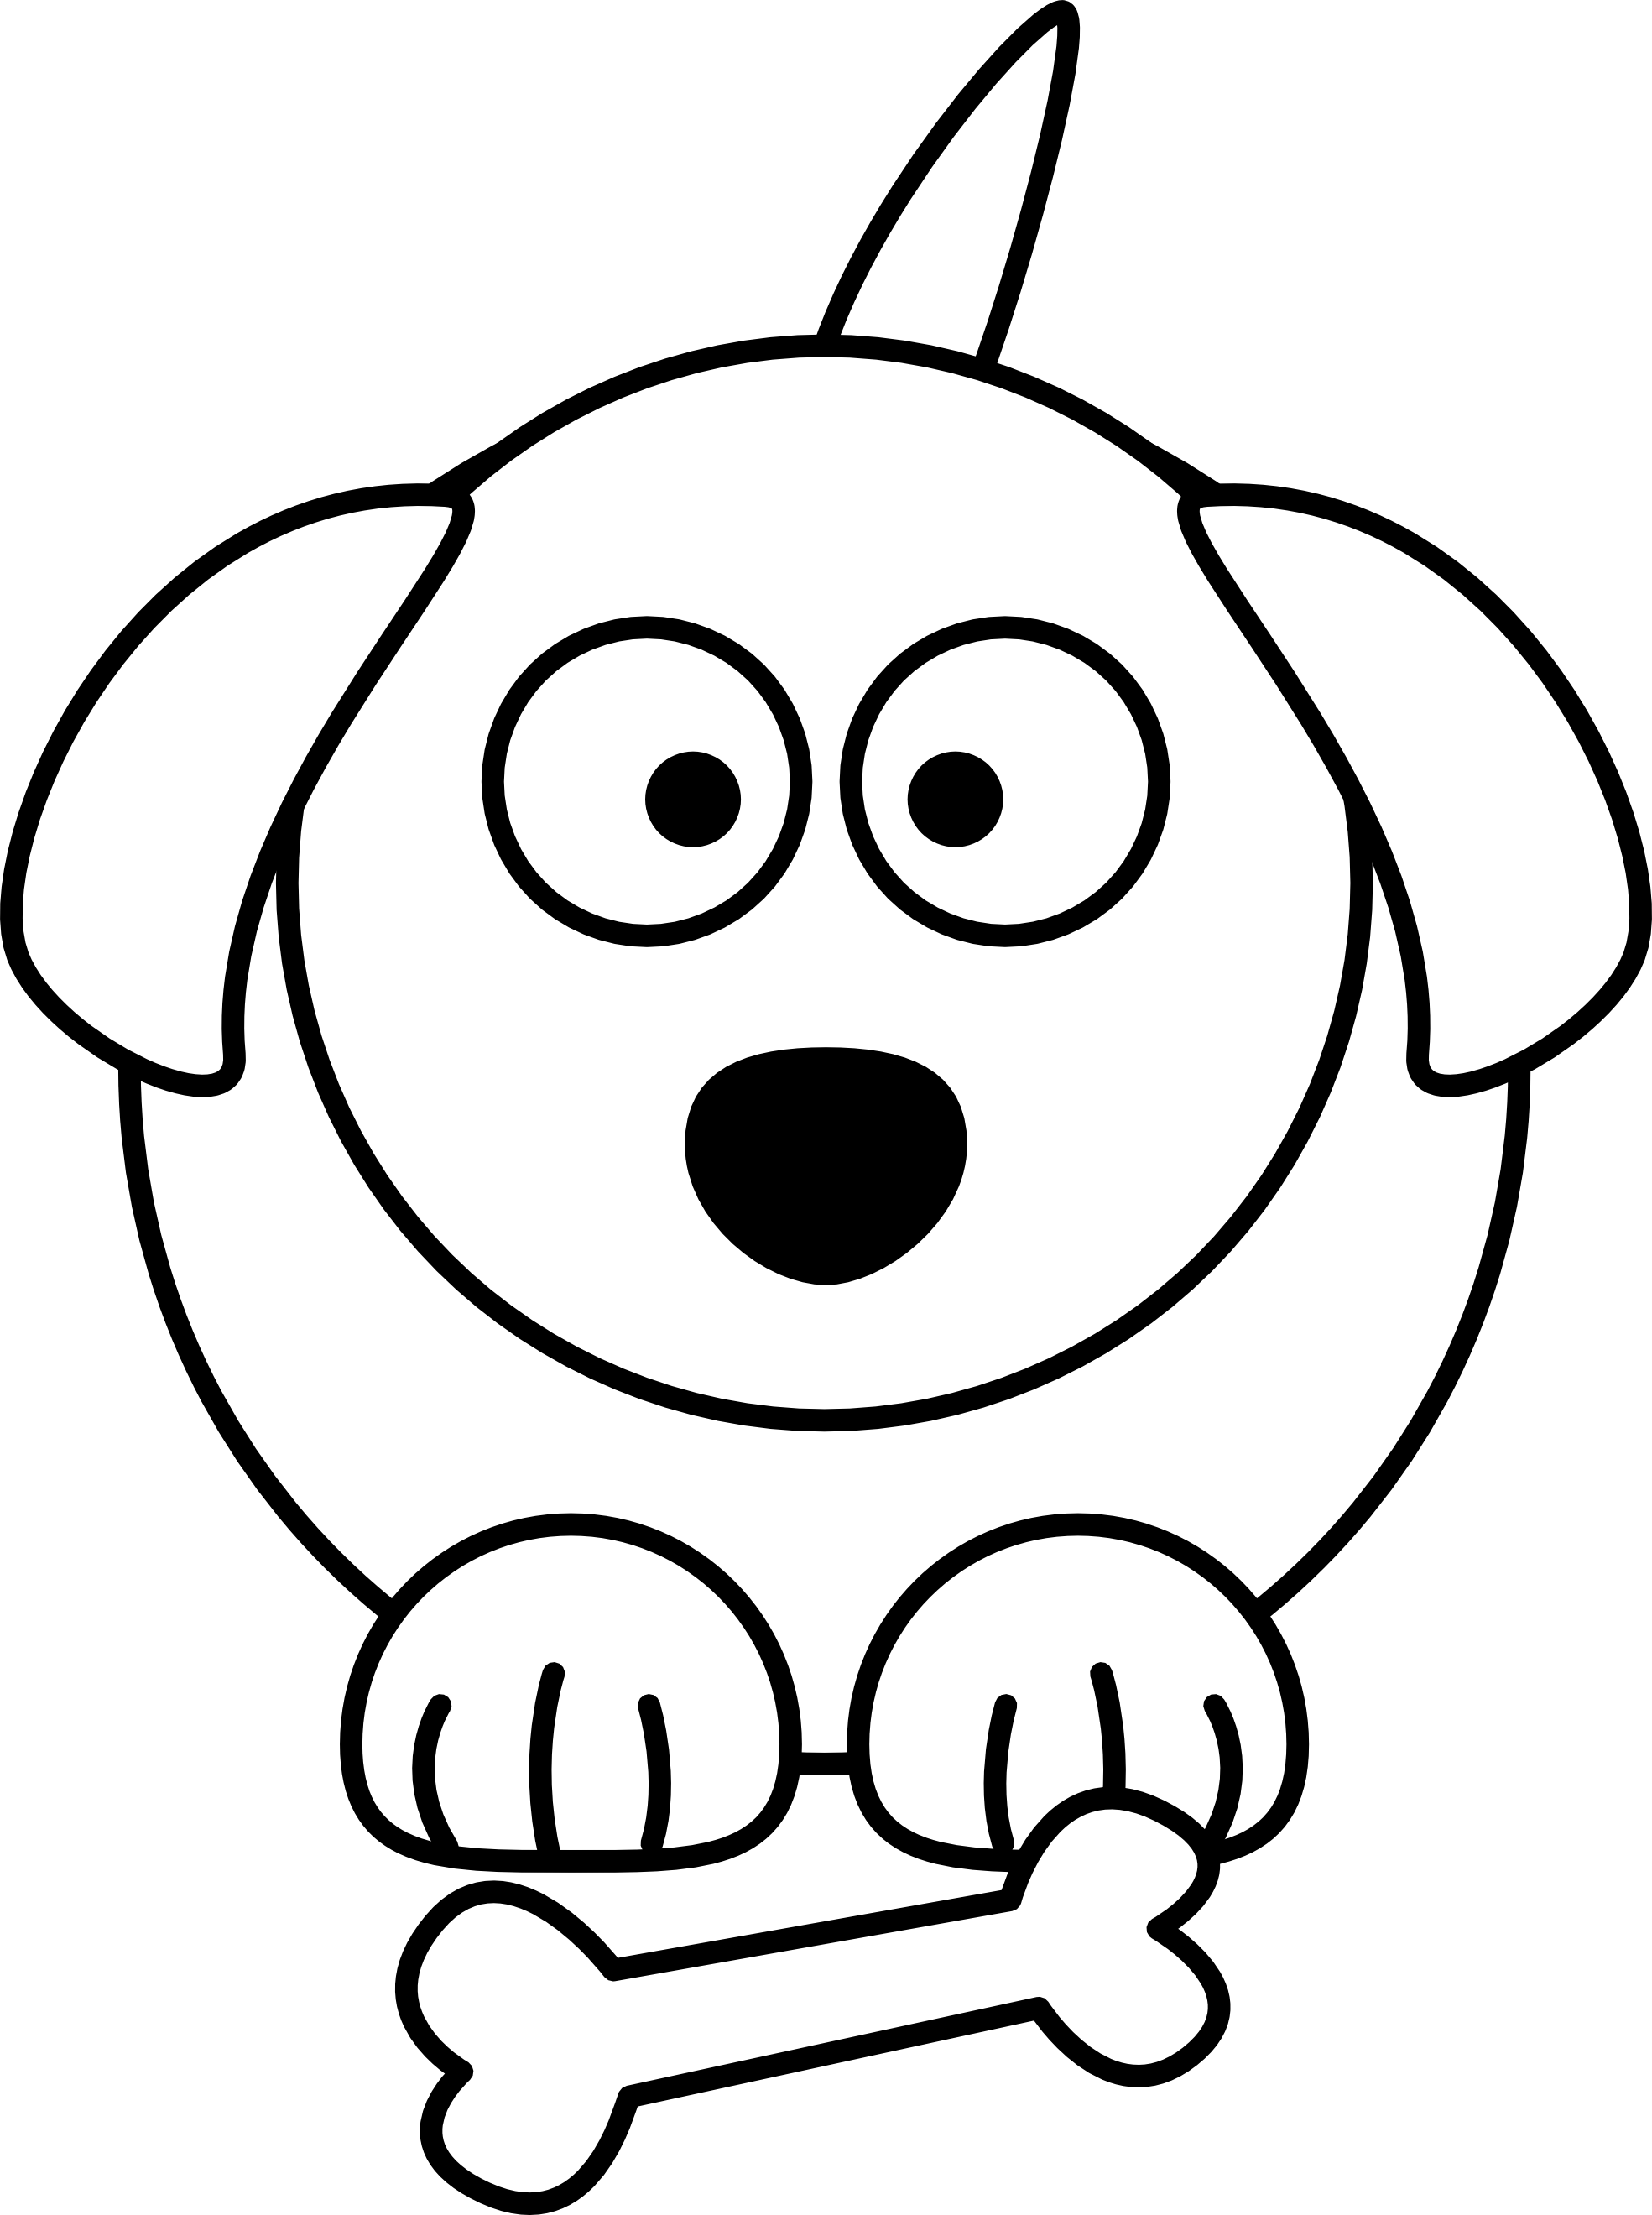 Dog clipart easy clipartxtras png